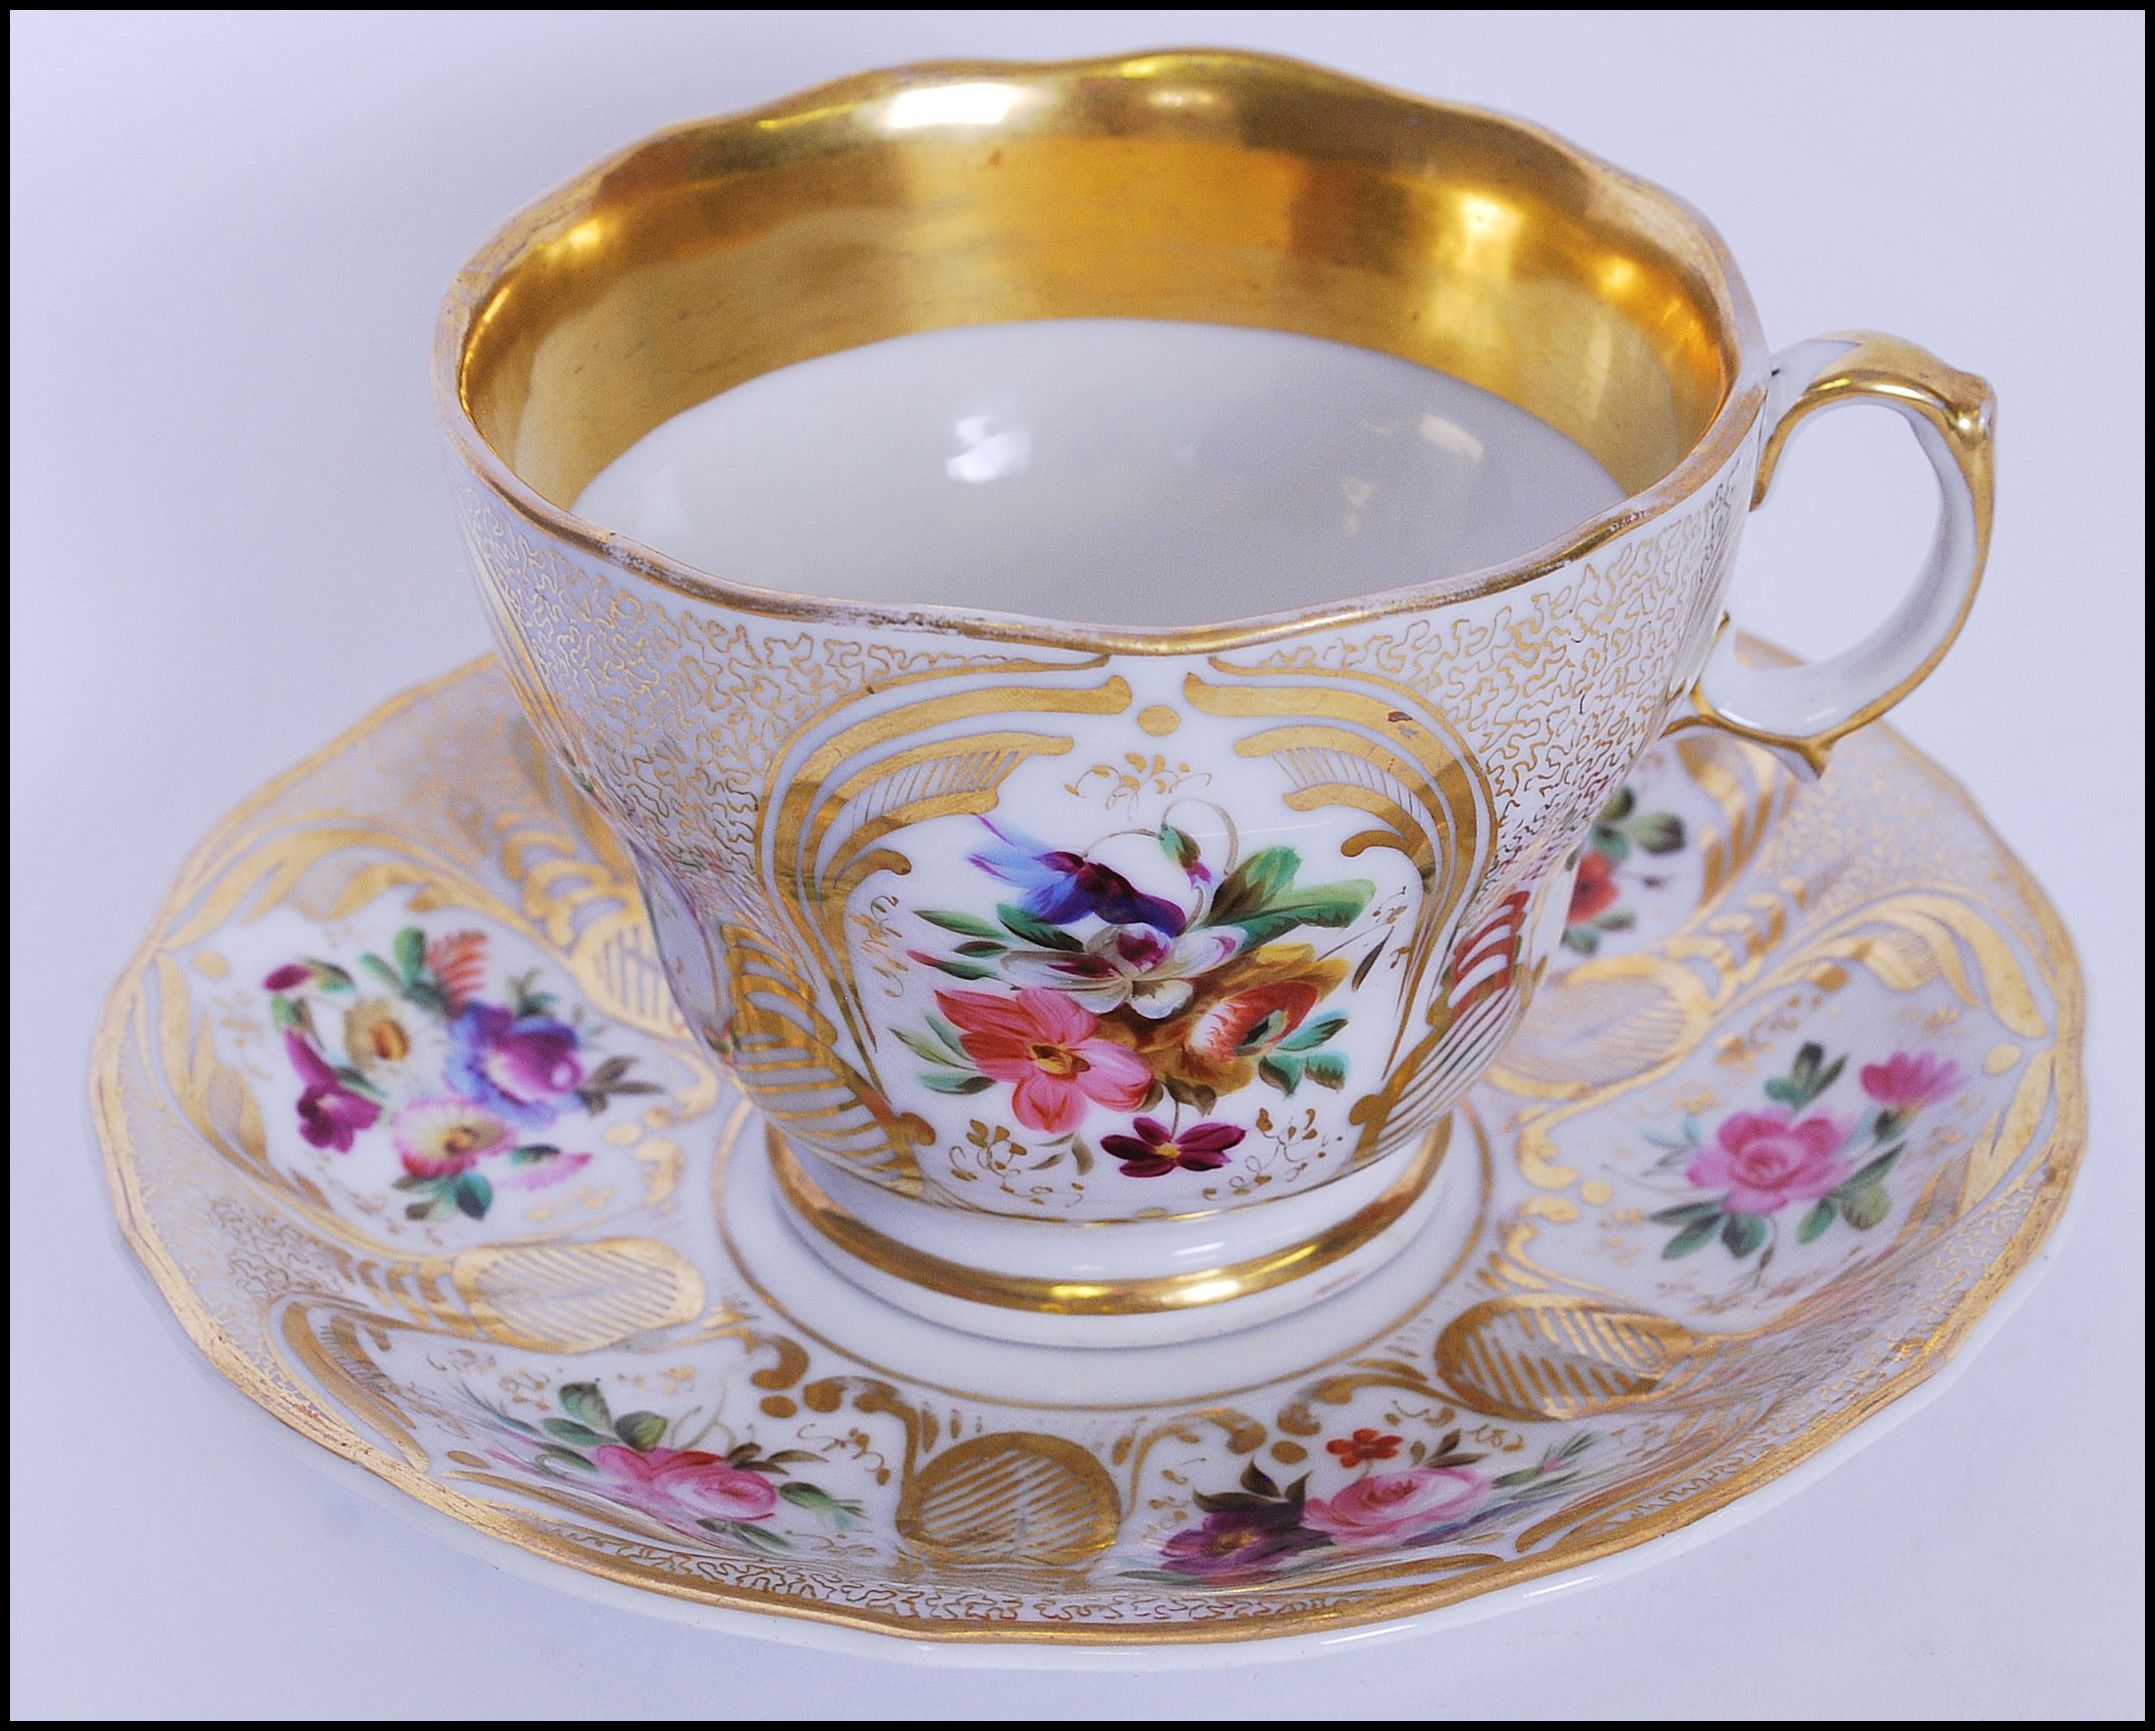 RUSSIAN IMPERIAL PORCELAIN GARDNER BREAKFAST CUP AND SAUCER - Image 2 of 9